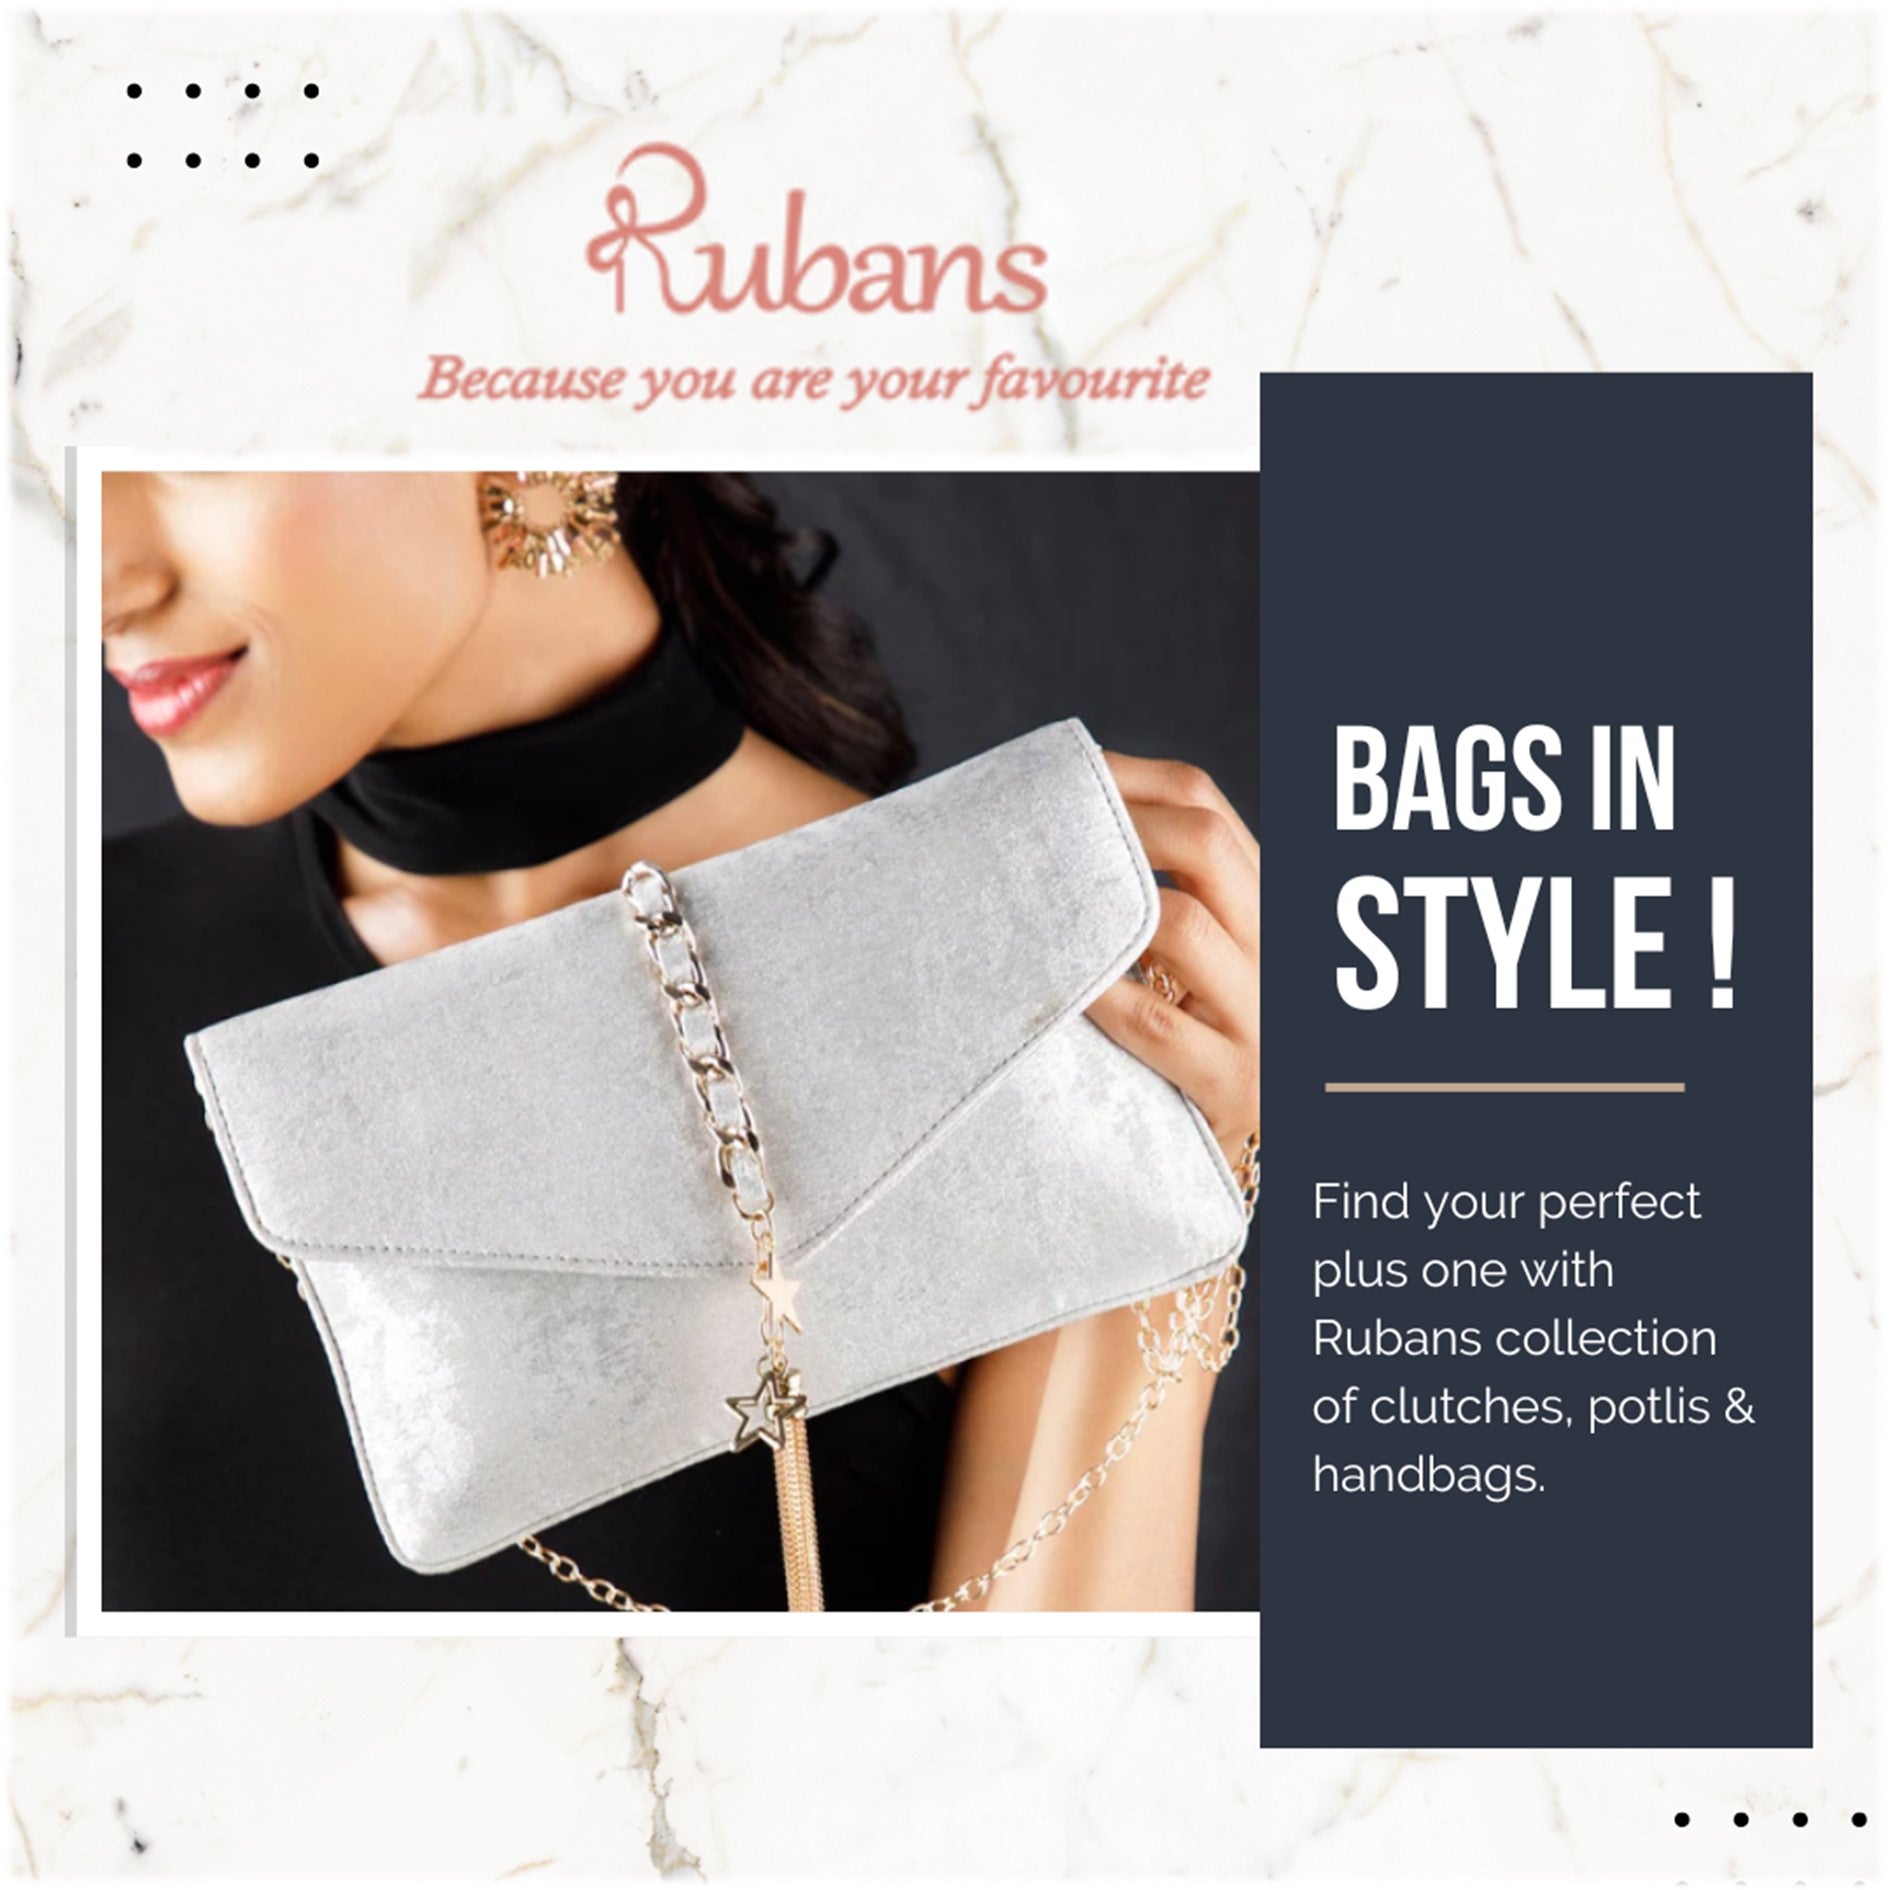 Pick your perfect collection of clutches, potlis & handbags